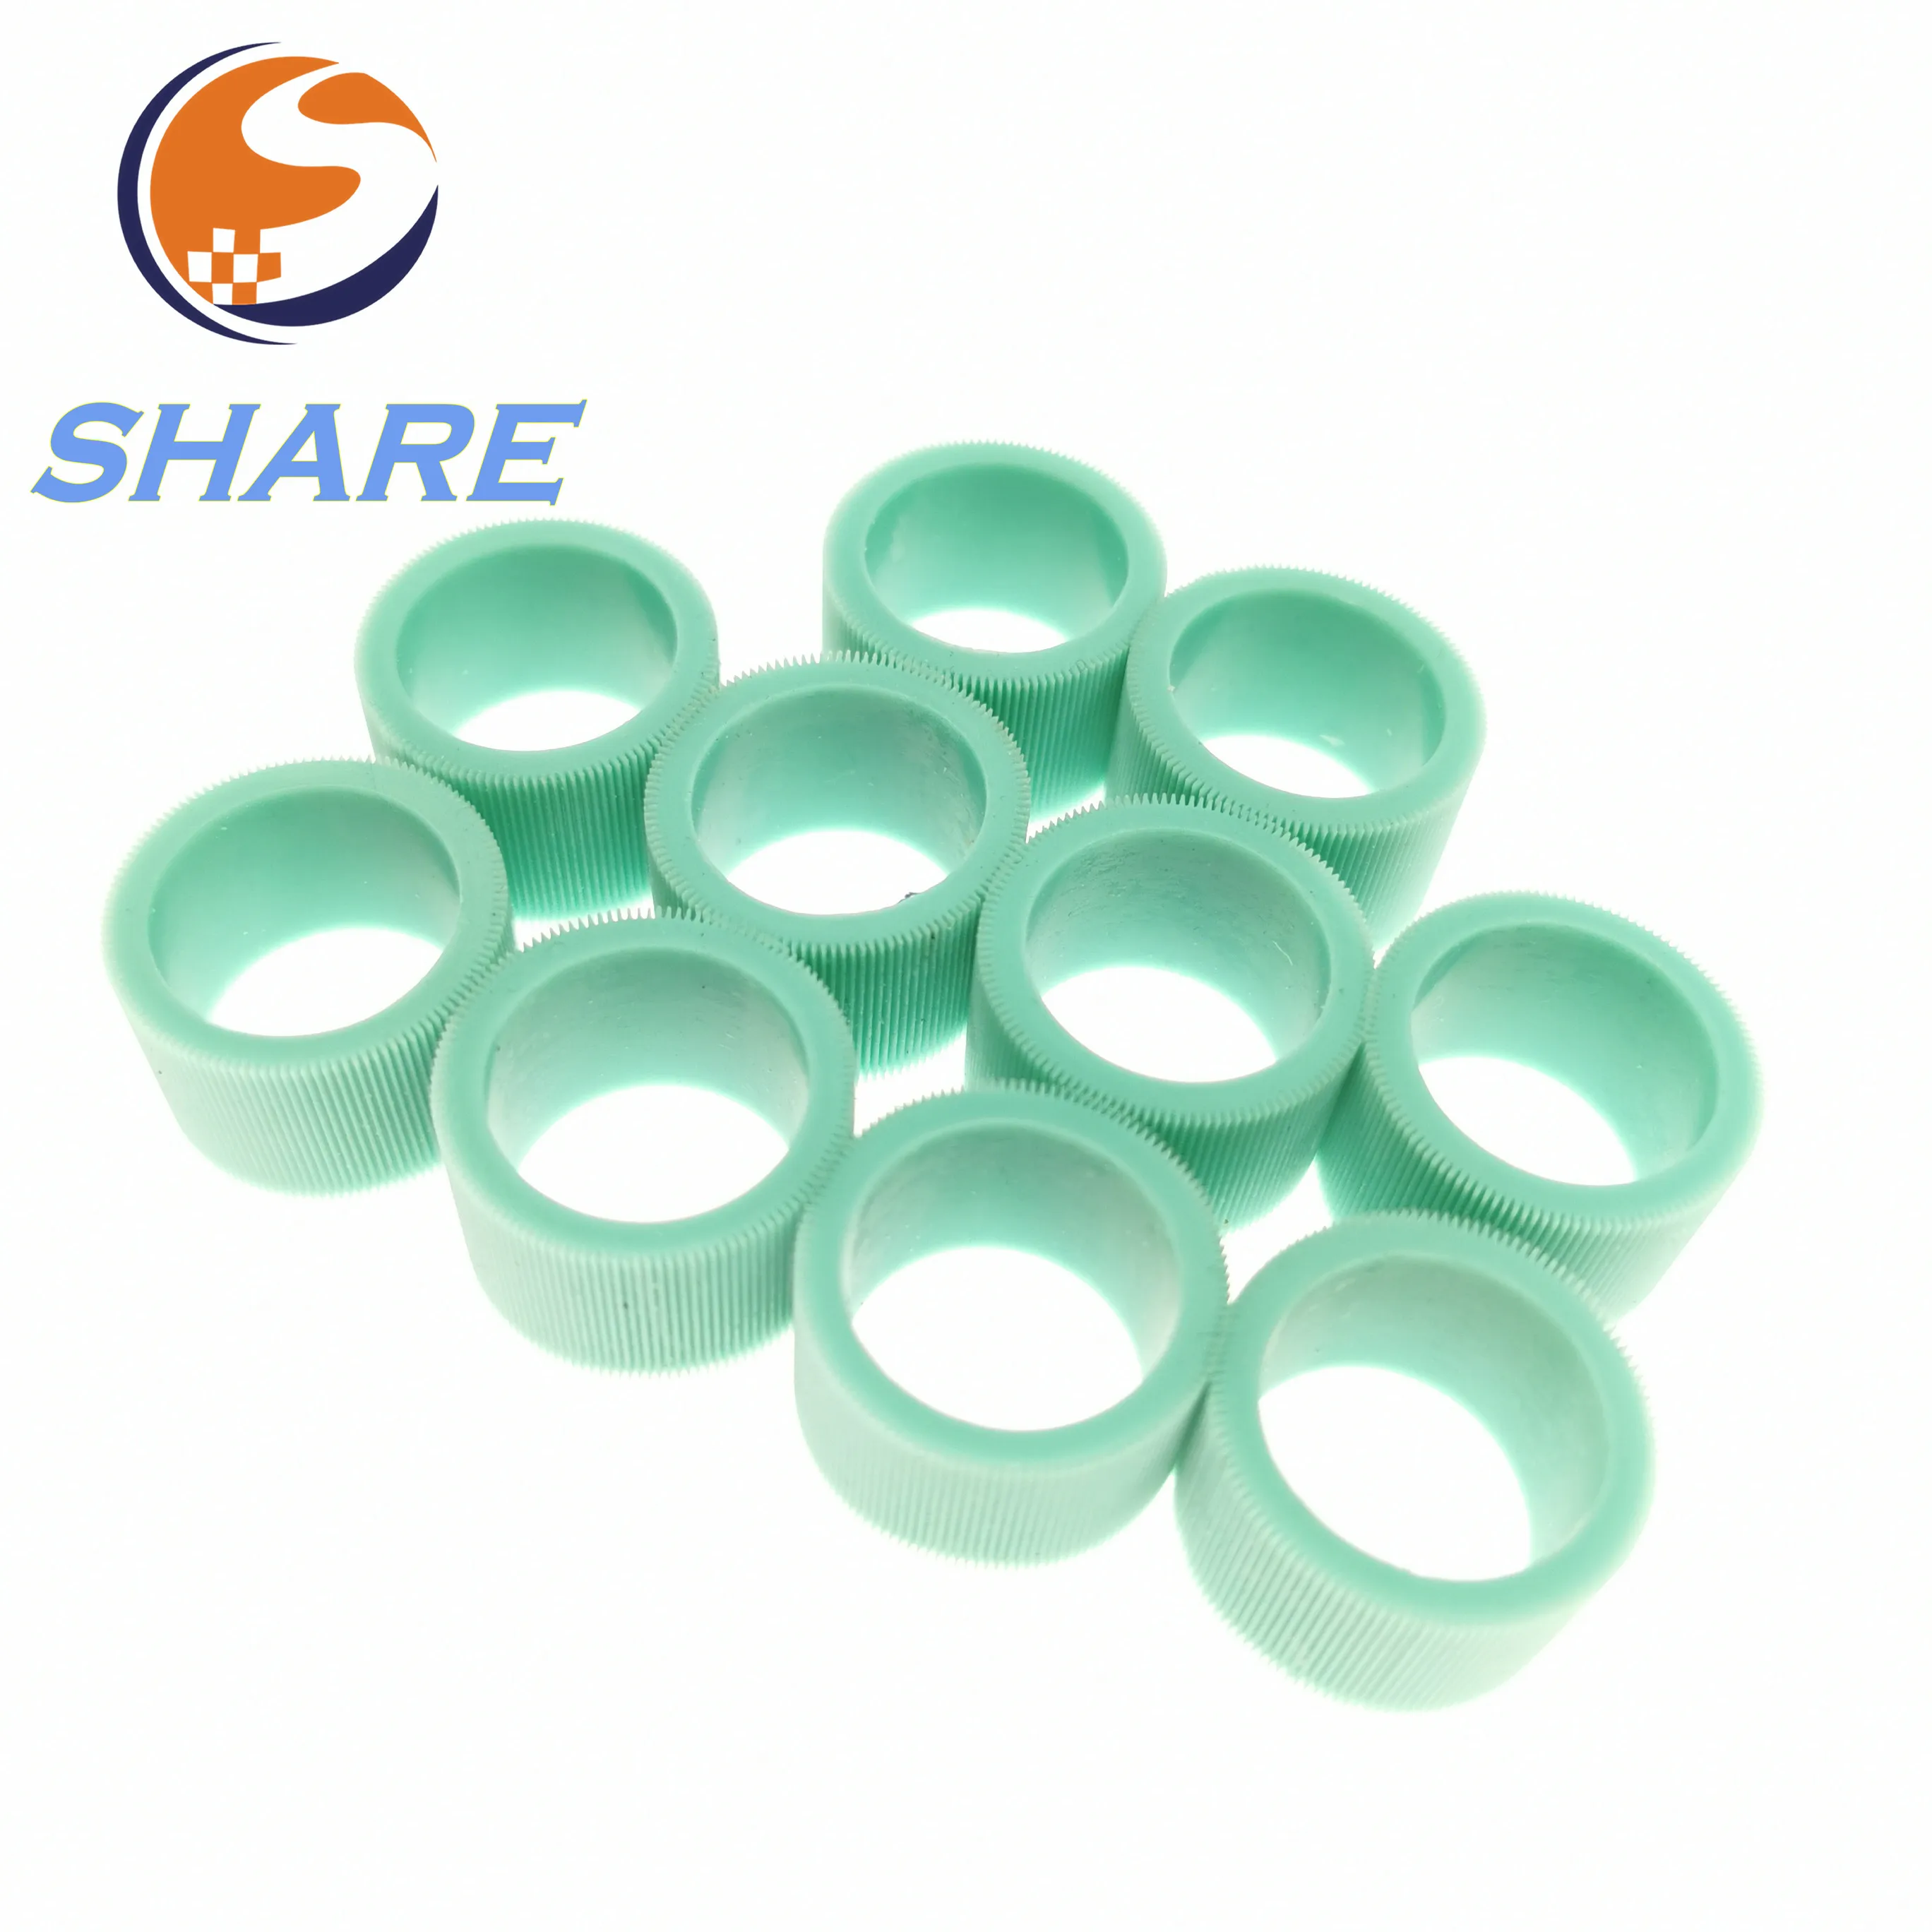 Share 50ps pickup rubber feed rubber 41X0958 40X8297 for Lexmark MS310 312 315 415 510 610 511 1140 1145 3150 611 711 811 810